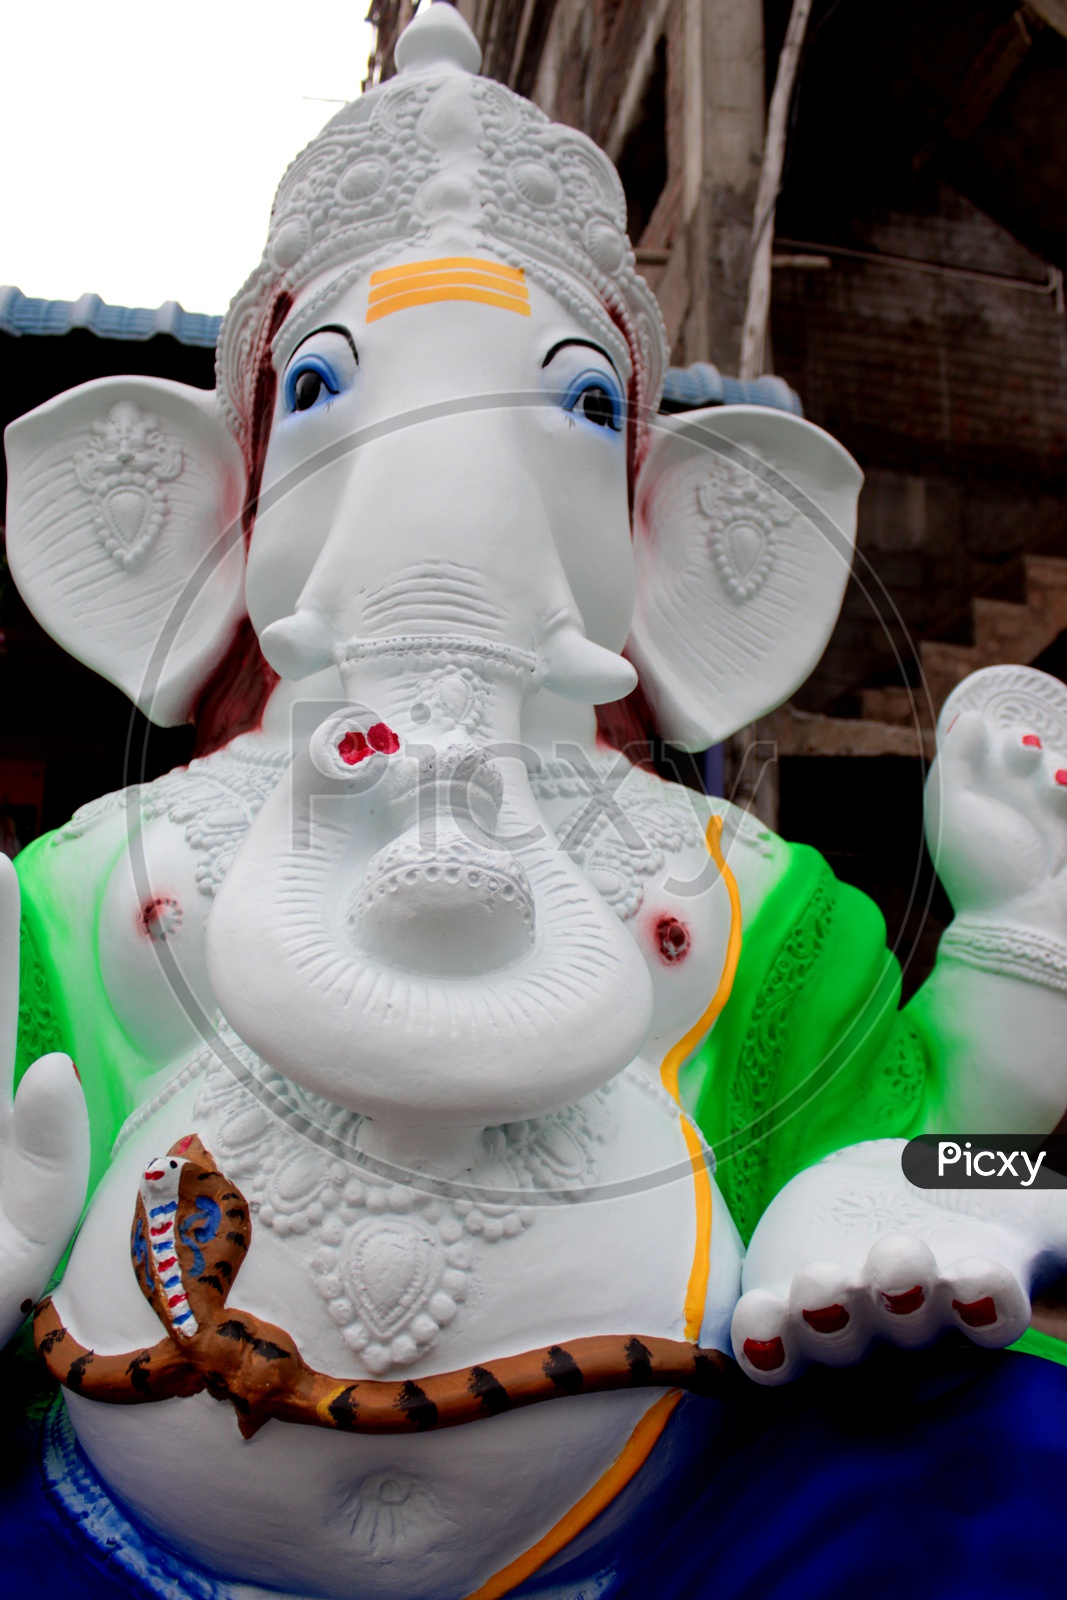 The final count down for the Ganesh Chathurthi